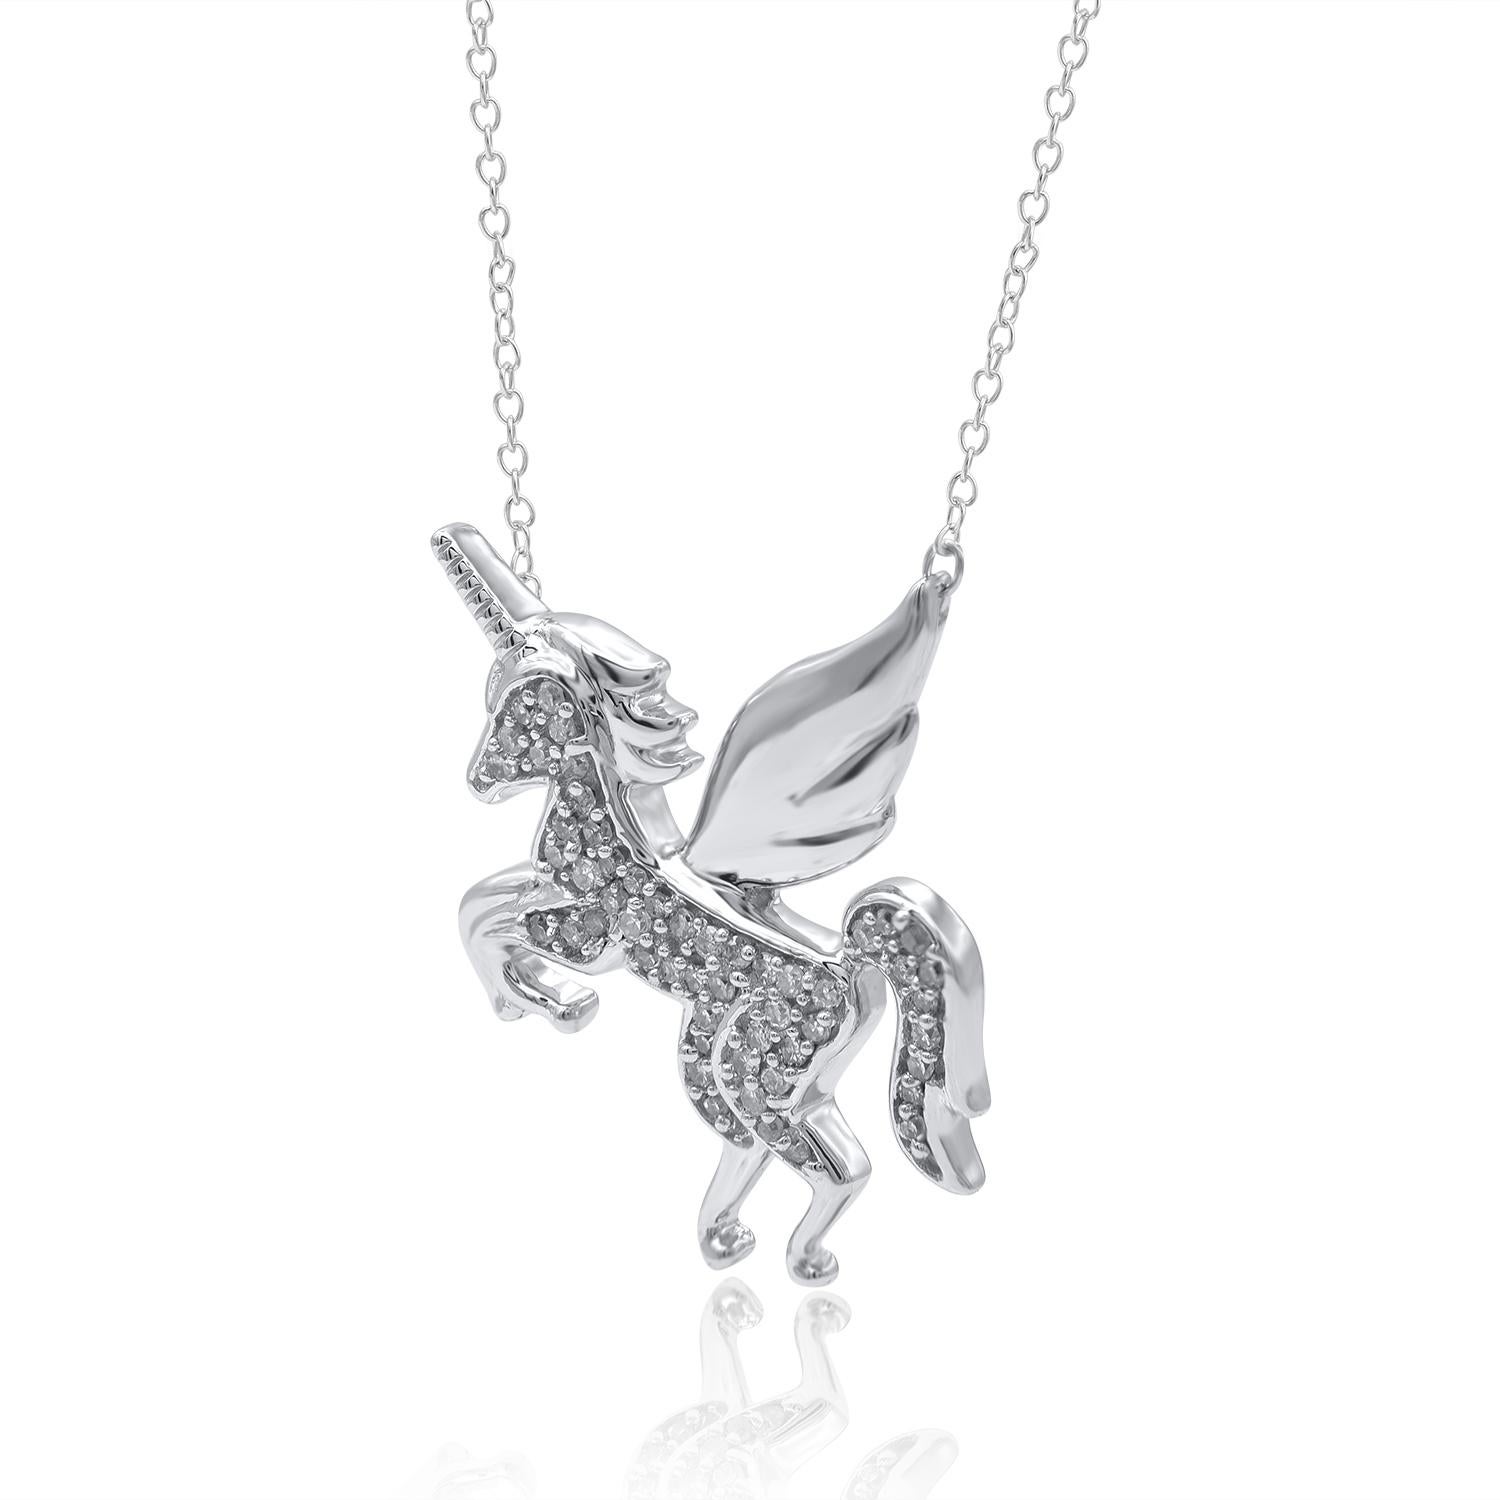 This sparkling unicorn pendant is delightful choice. Hand-crafted by our in-house experts in 14 karat white gold and studded with 53 round single cut diamond in pave setting. he white diamonds are graded as H-I color and I2 clarity. The total